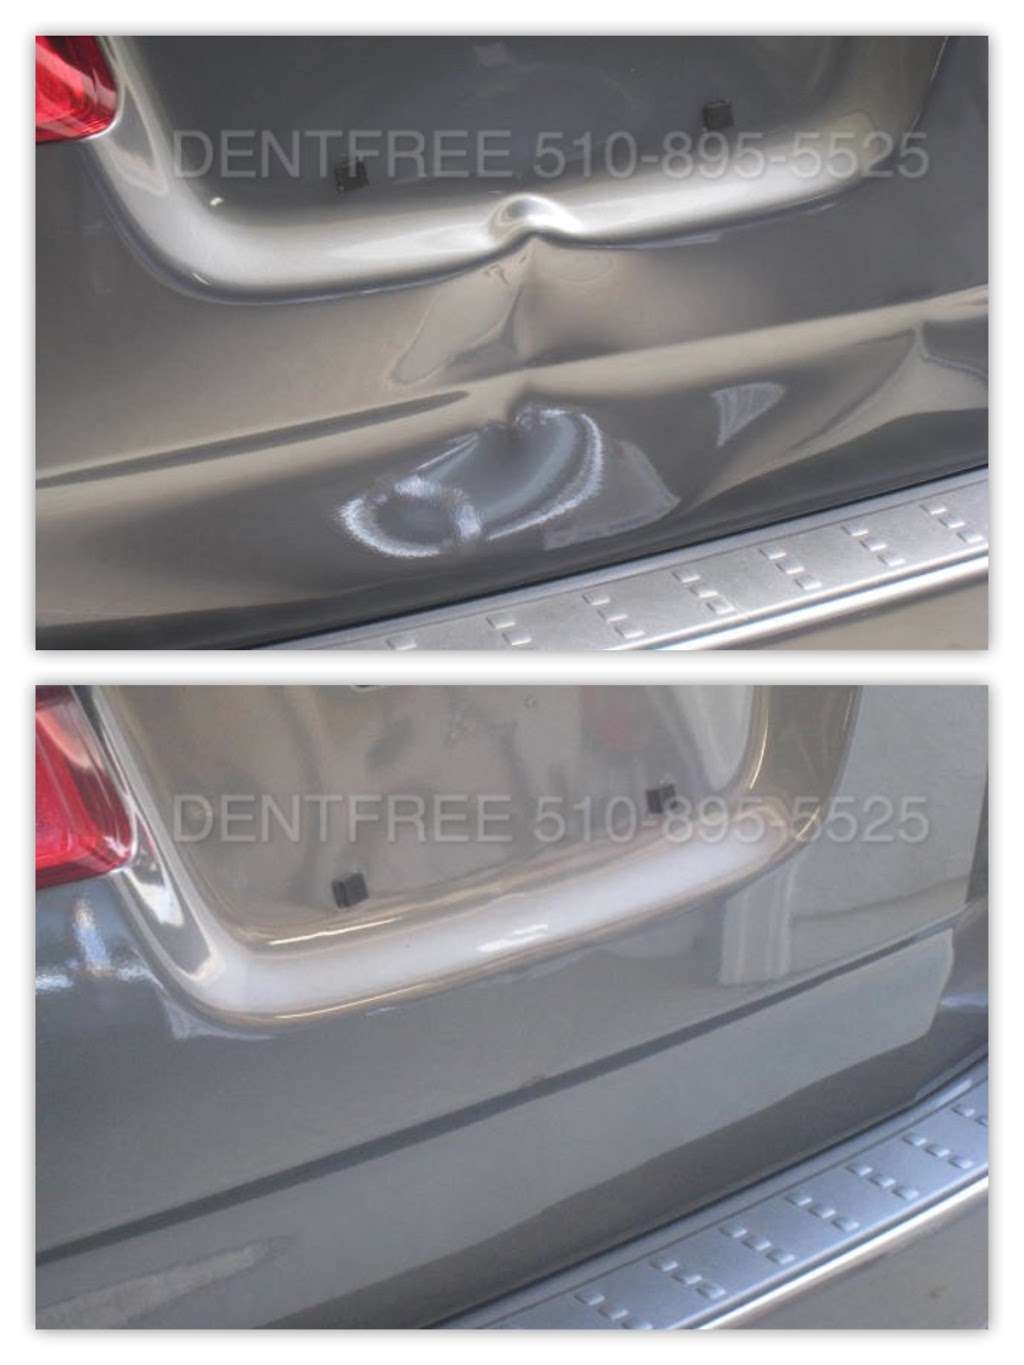 Dent Free Paintless Dent Removal | San Leandro, CA 94579, USA | Phone: (510) 895-5525